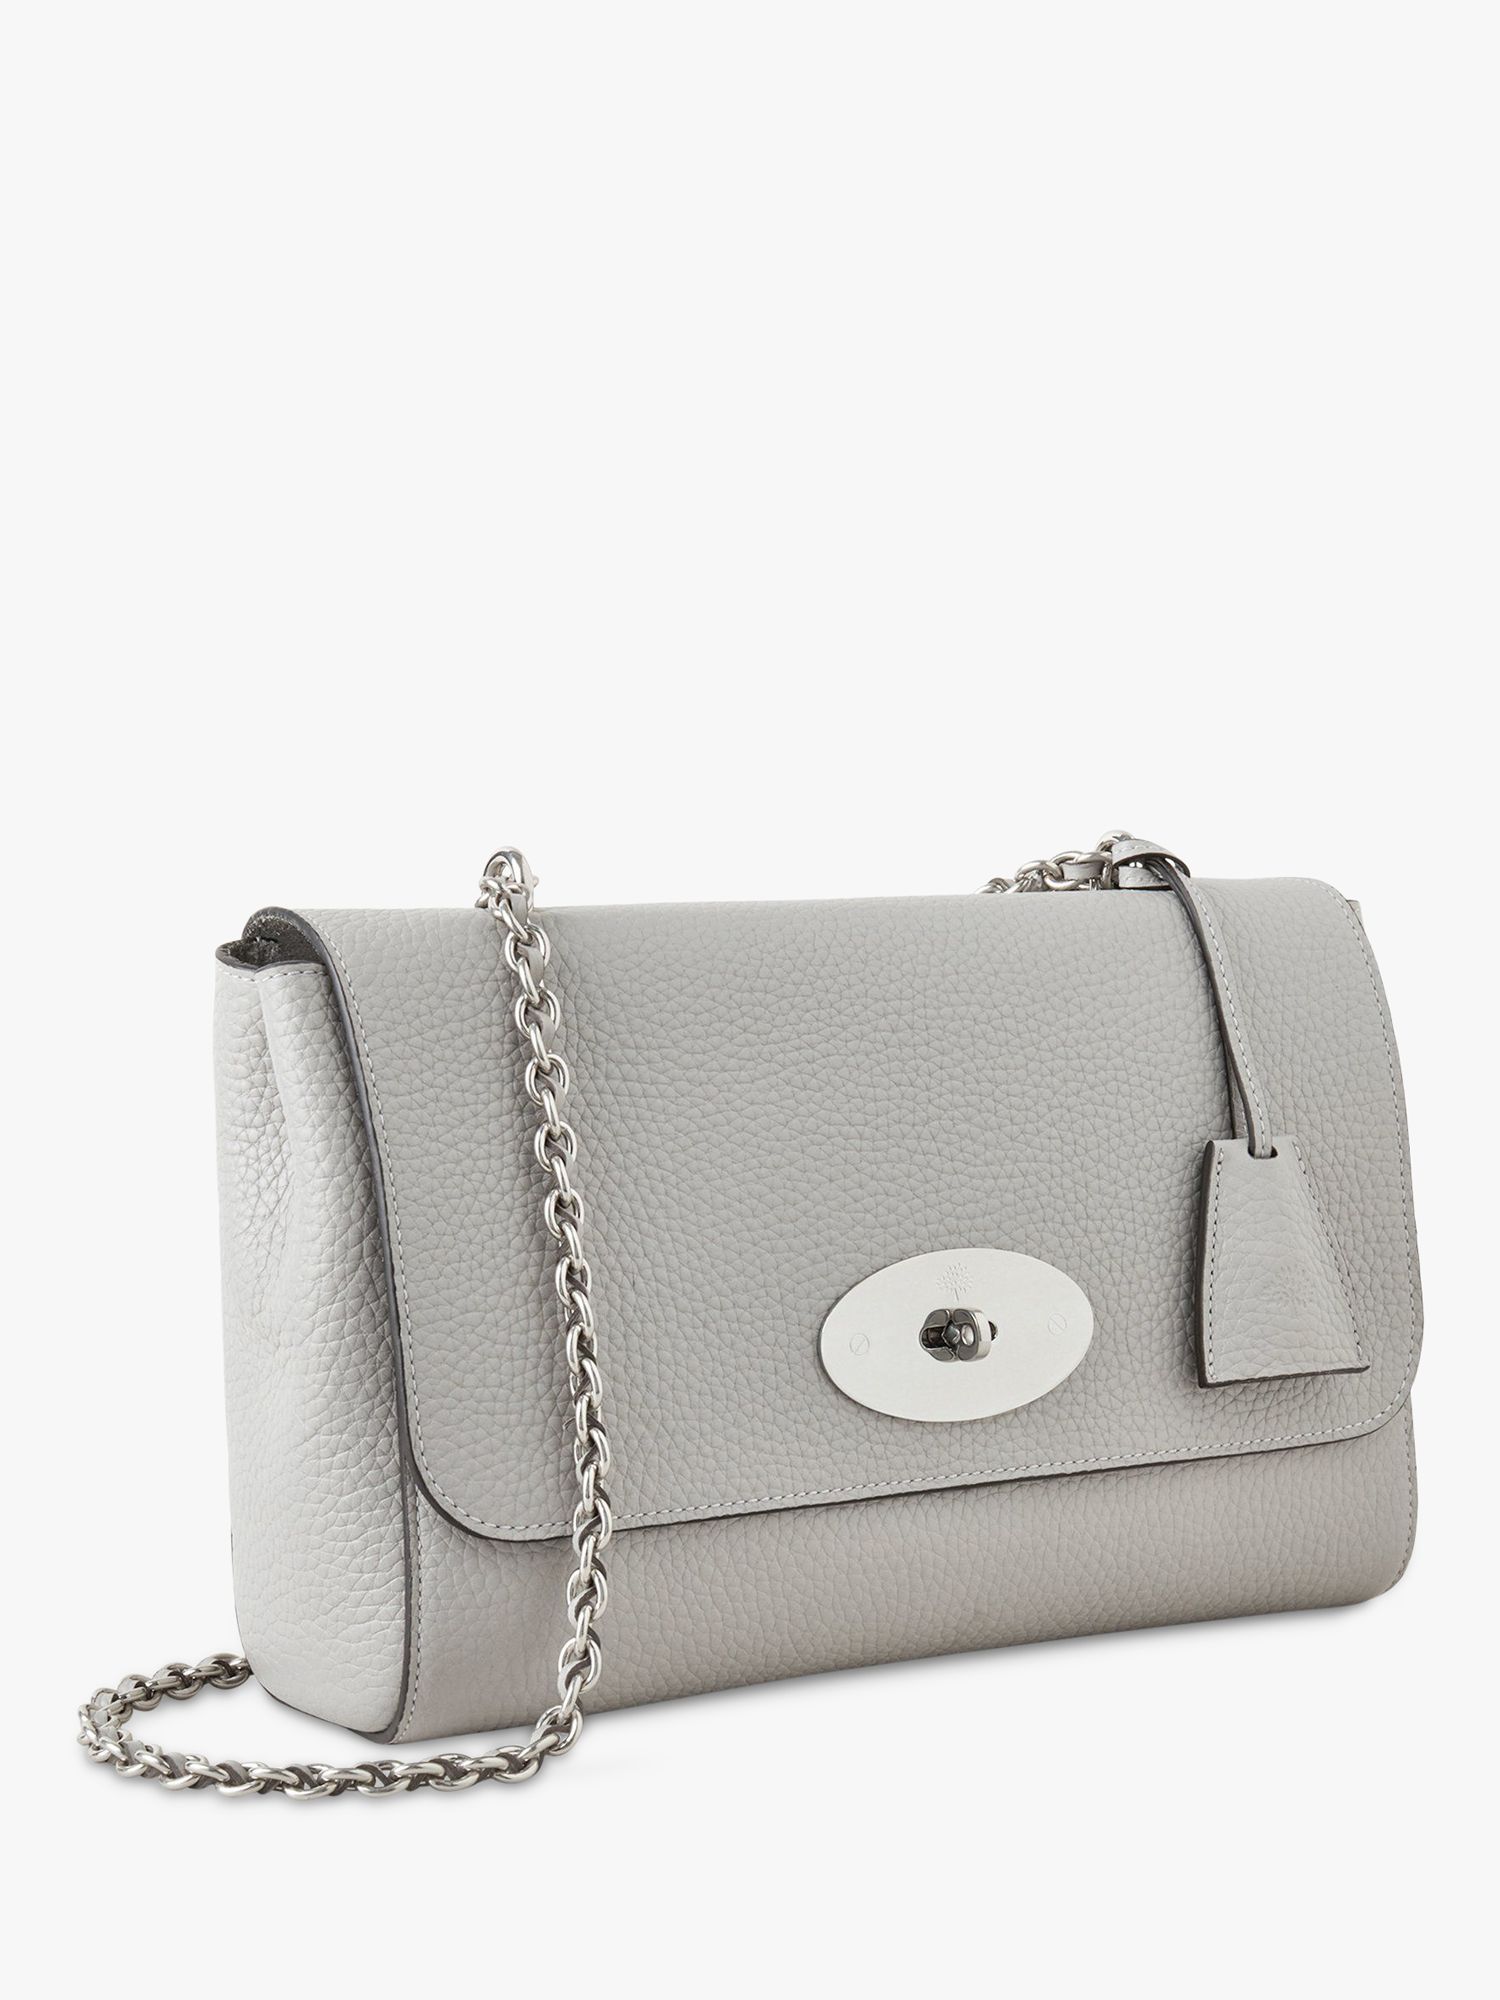 Mulberry Medium Lily Heavy Grain Leather Shoulder Bag, Pale Grey at ...